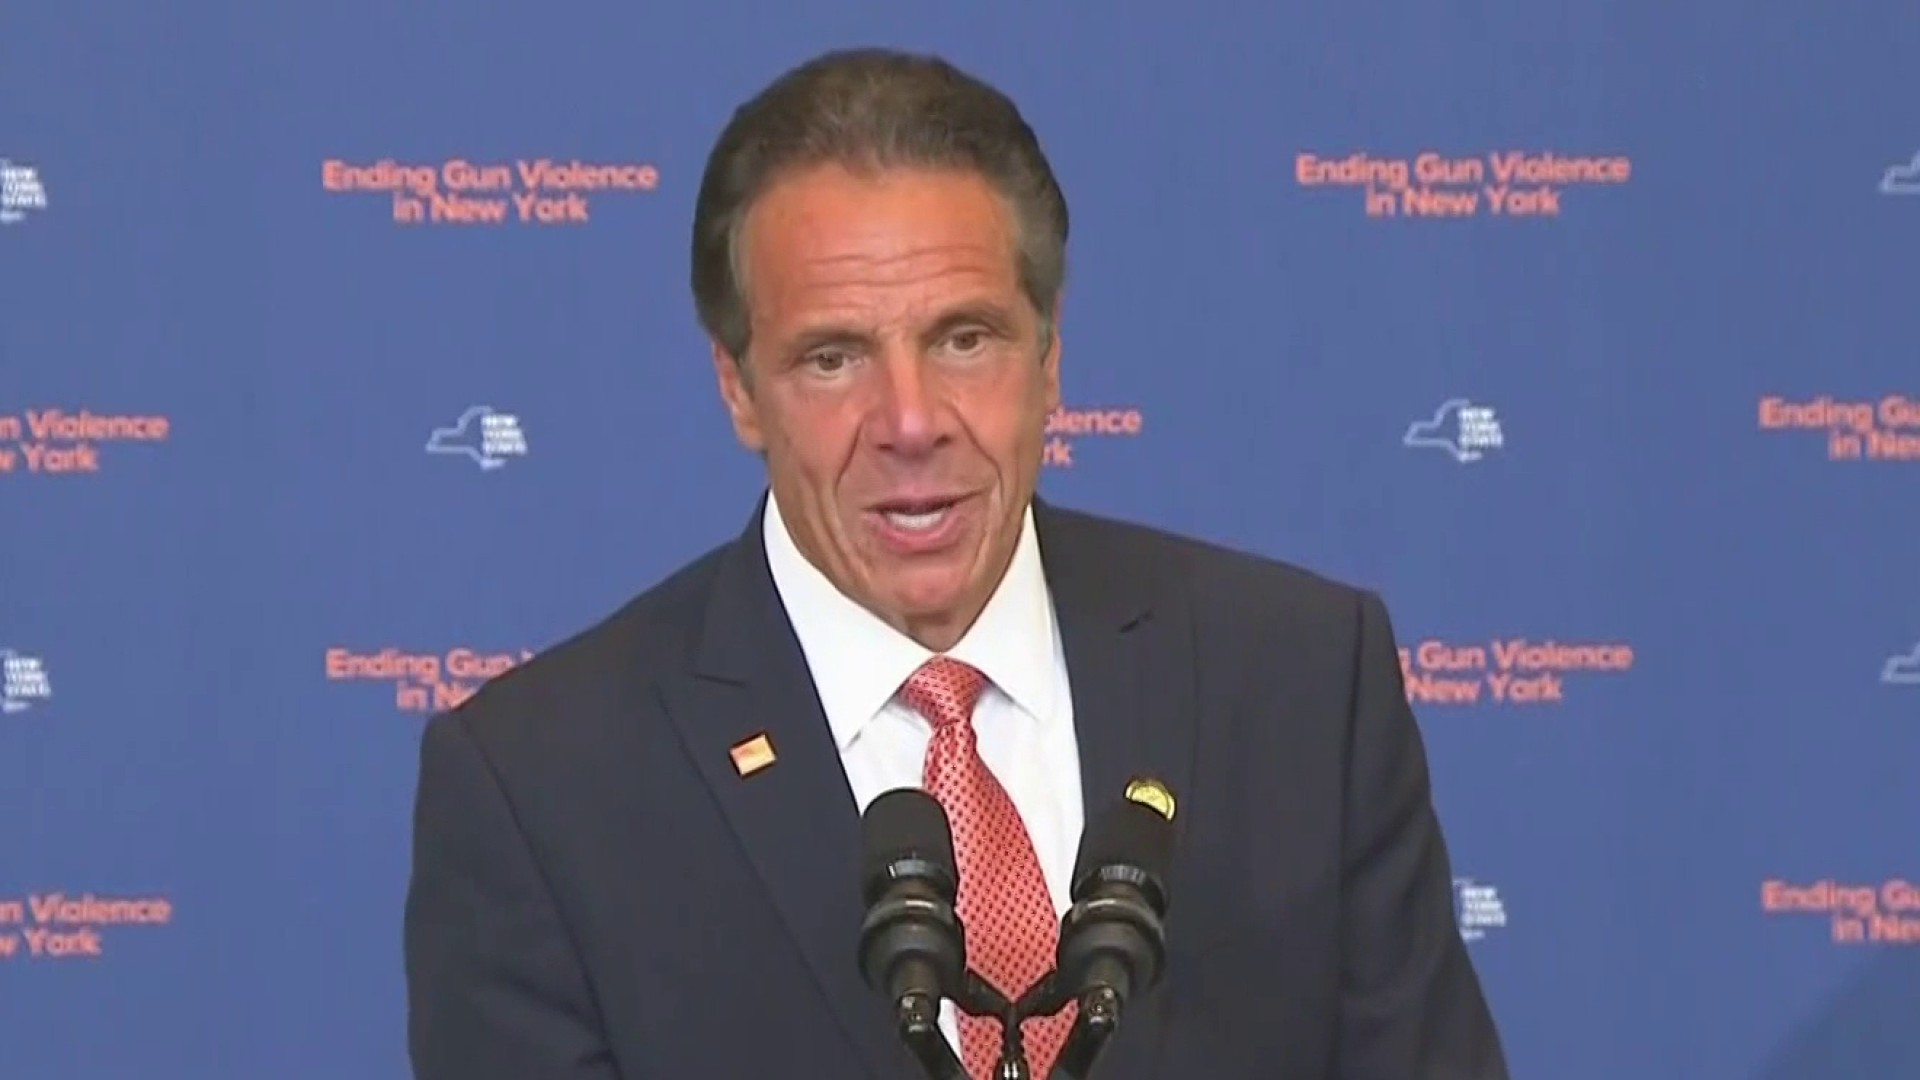 Gov. Cuomo To Be Questioned In Sexual Harassment Probe